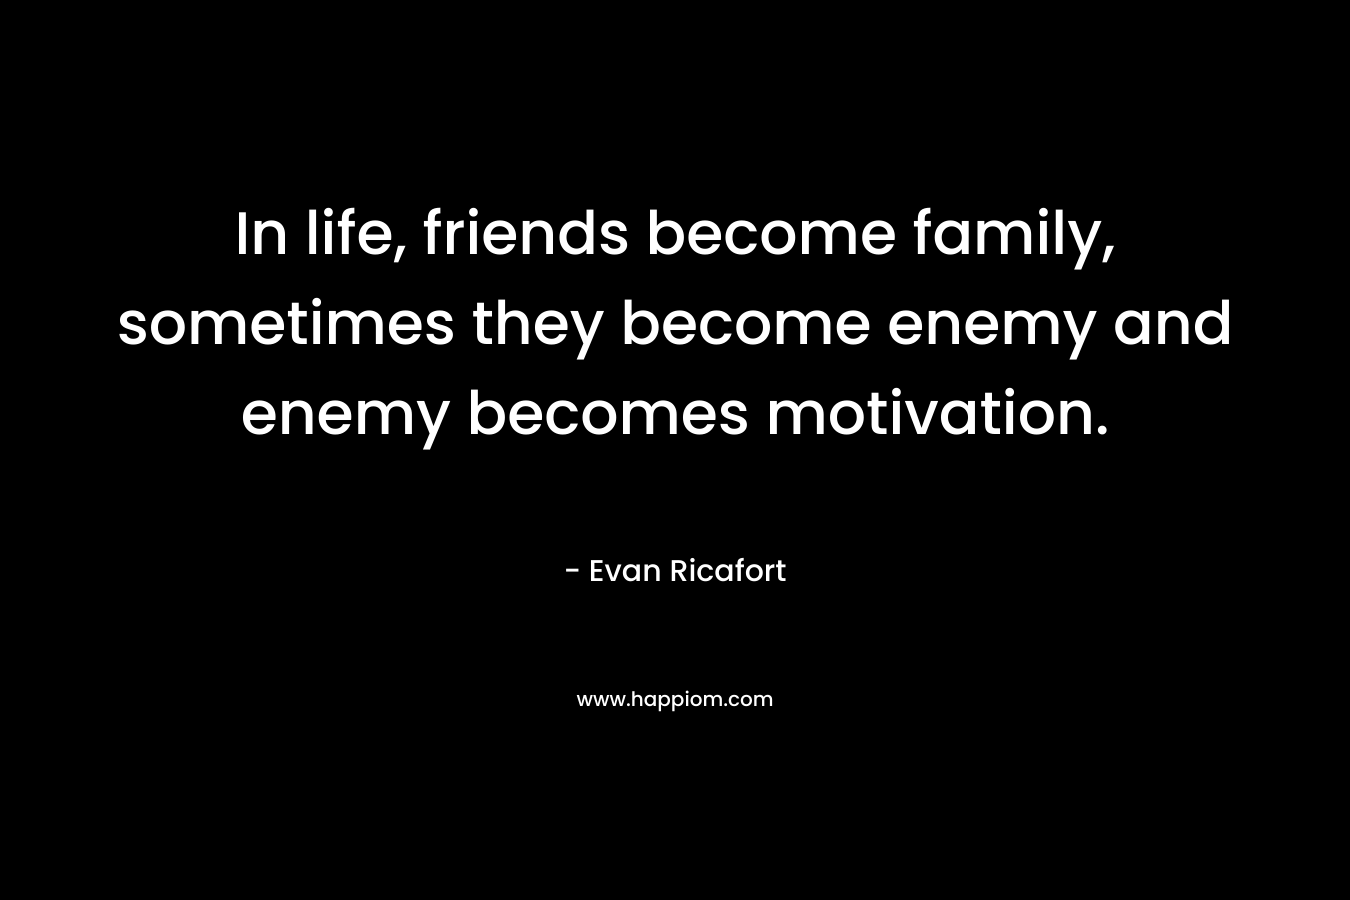 In life, friends become family, sometimes they become enemy and enemy becomes motivation.